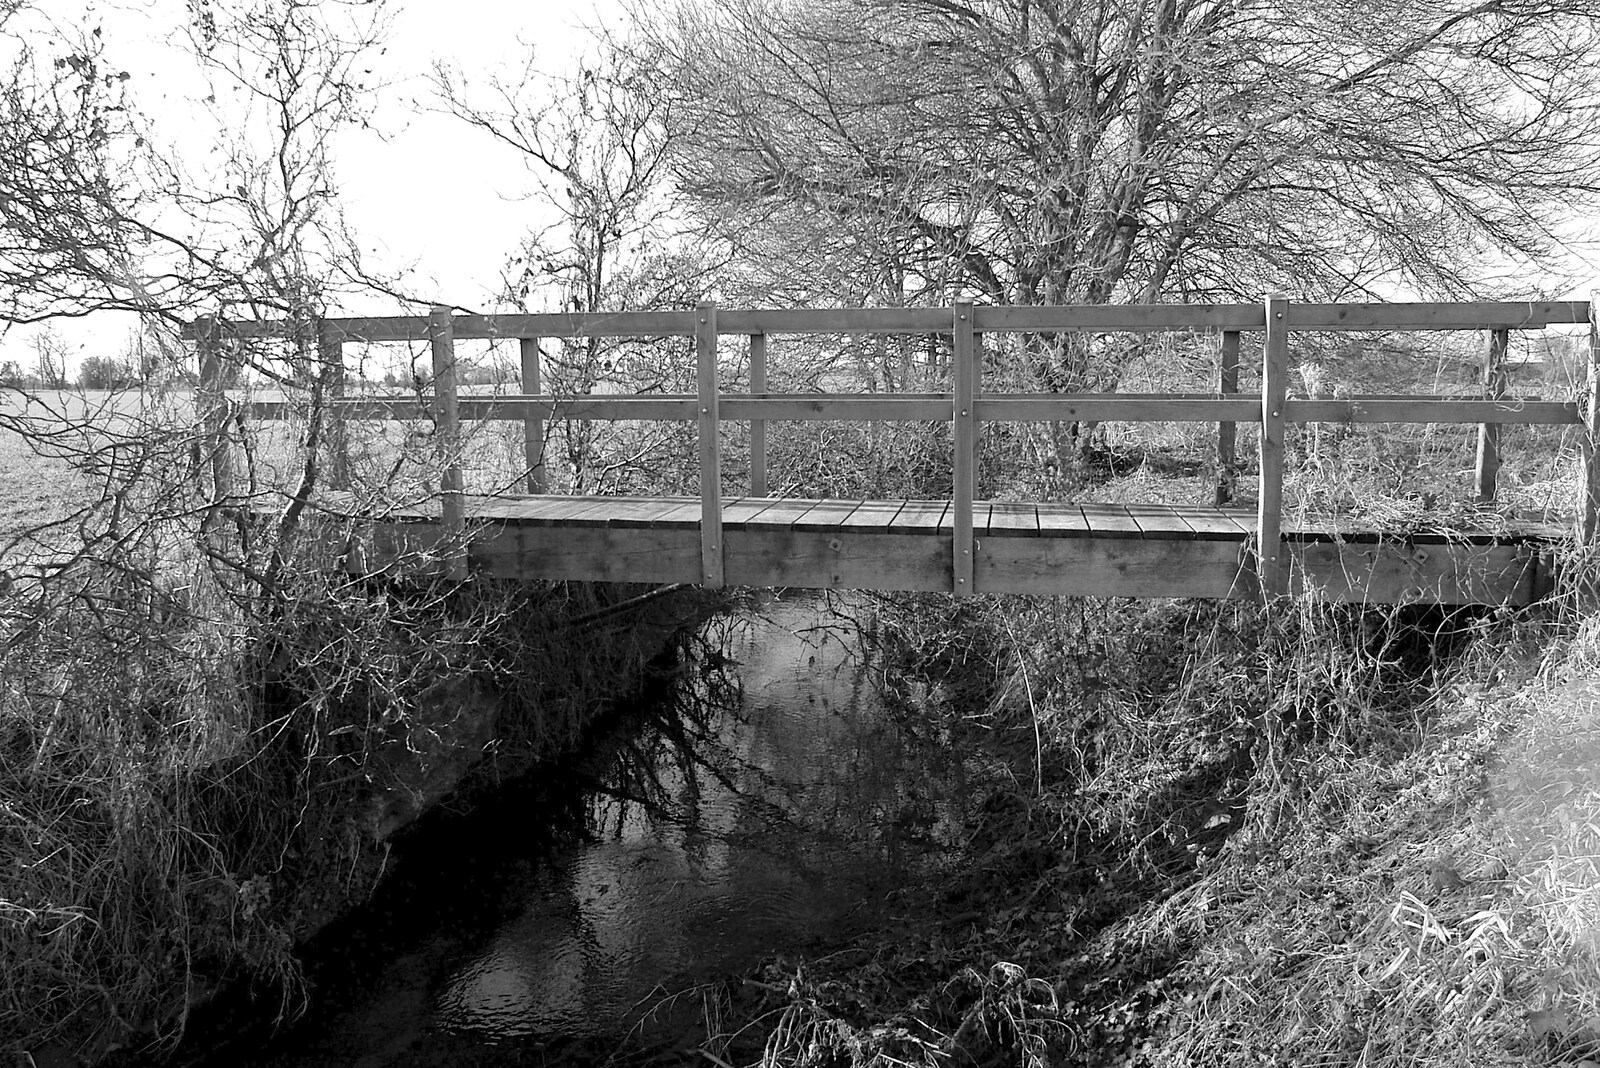 Footbridge over a stream, Finningham from Cambridge Bins and Little Chef Dereliction, Kentford, Suffolk - 21st January 2006